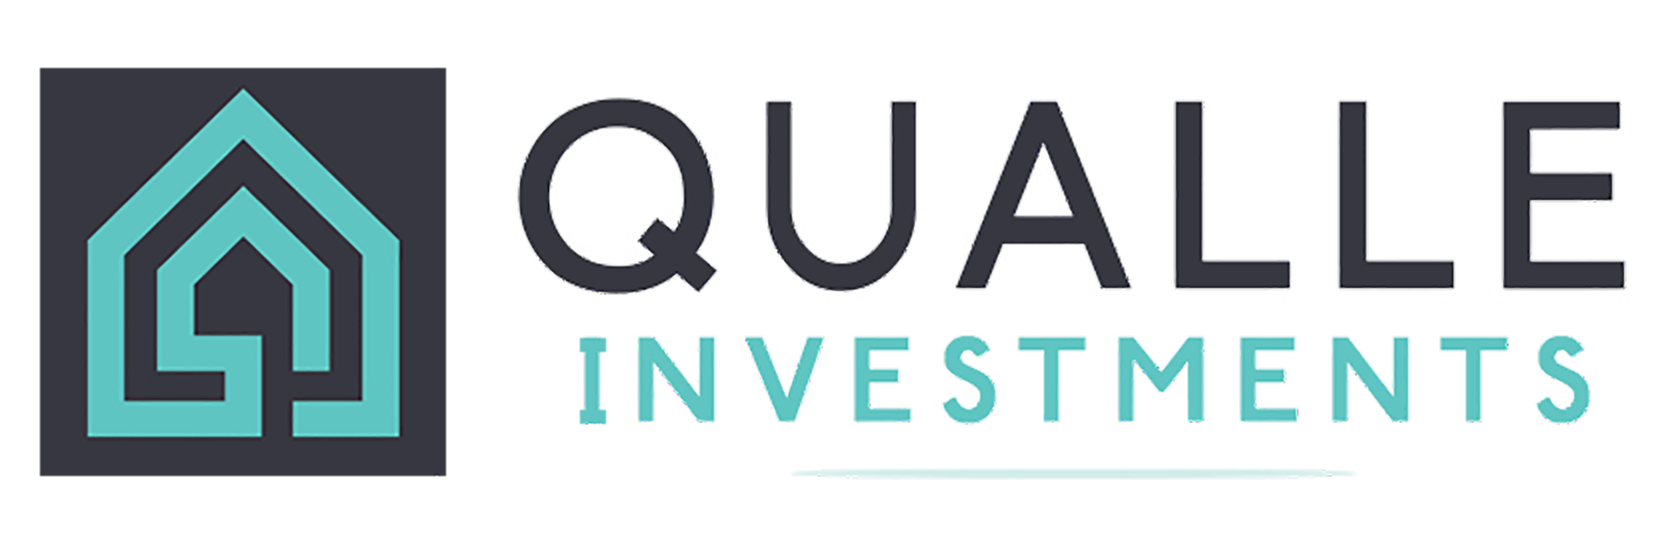 Qualle Investments